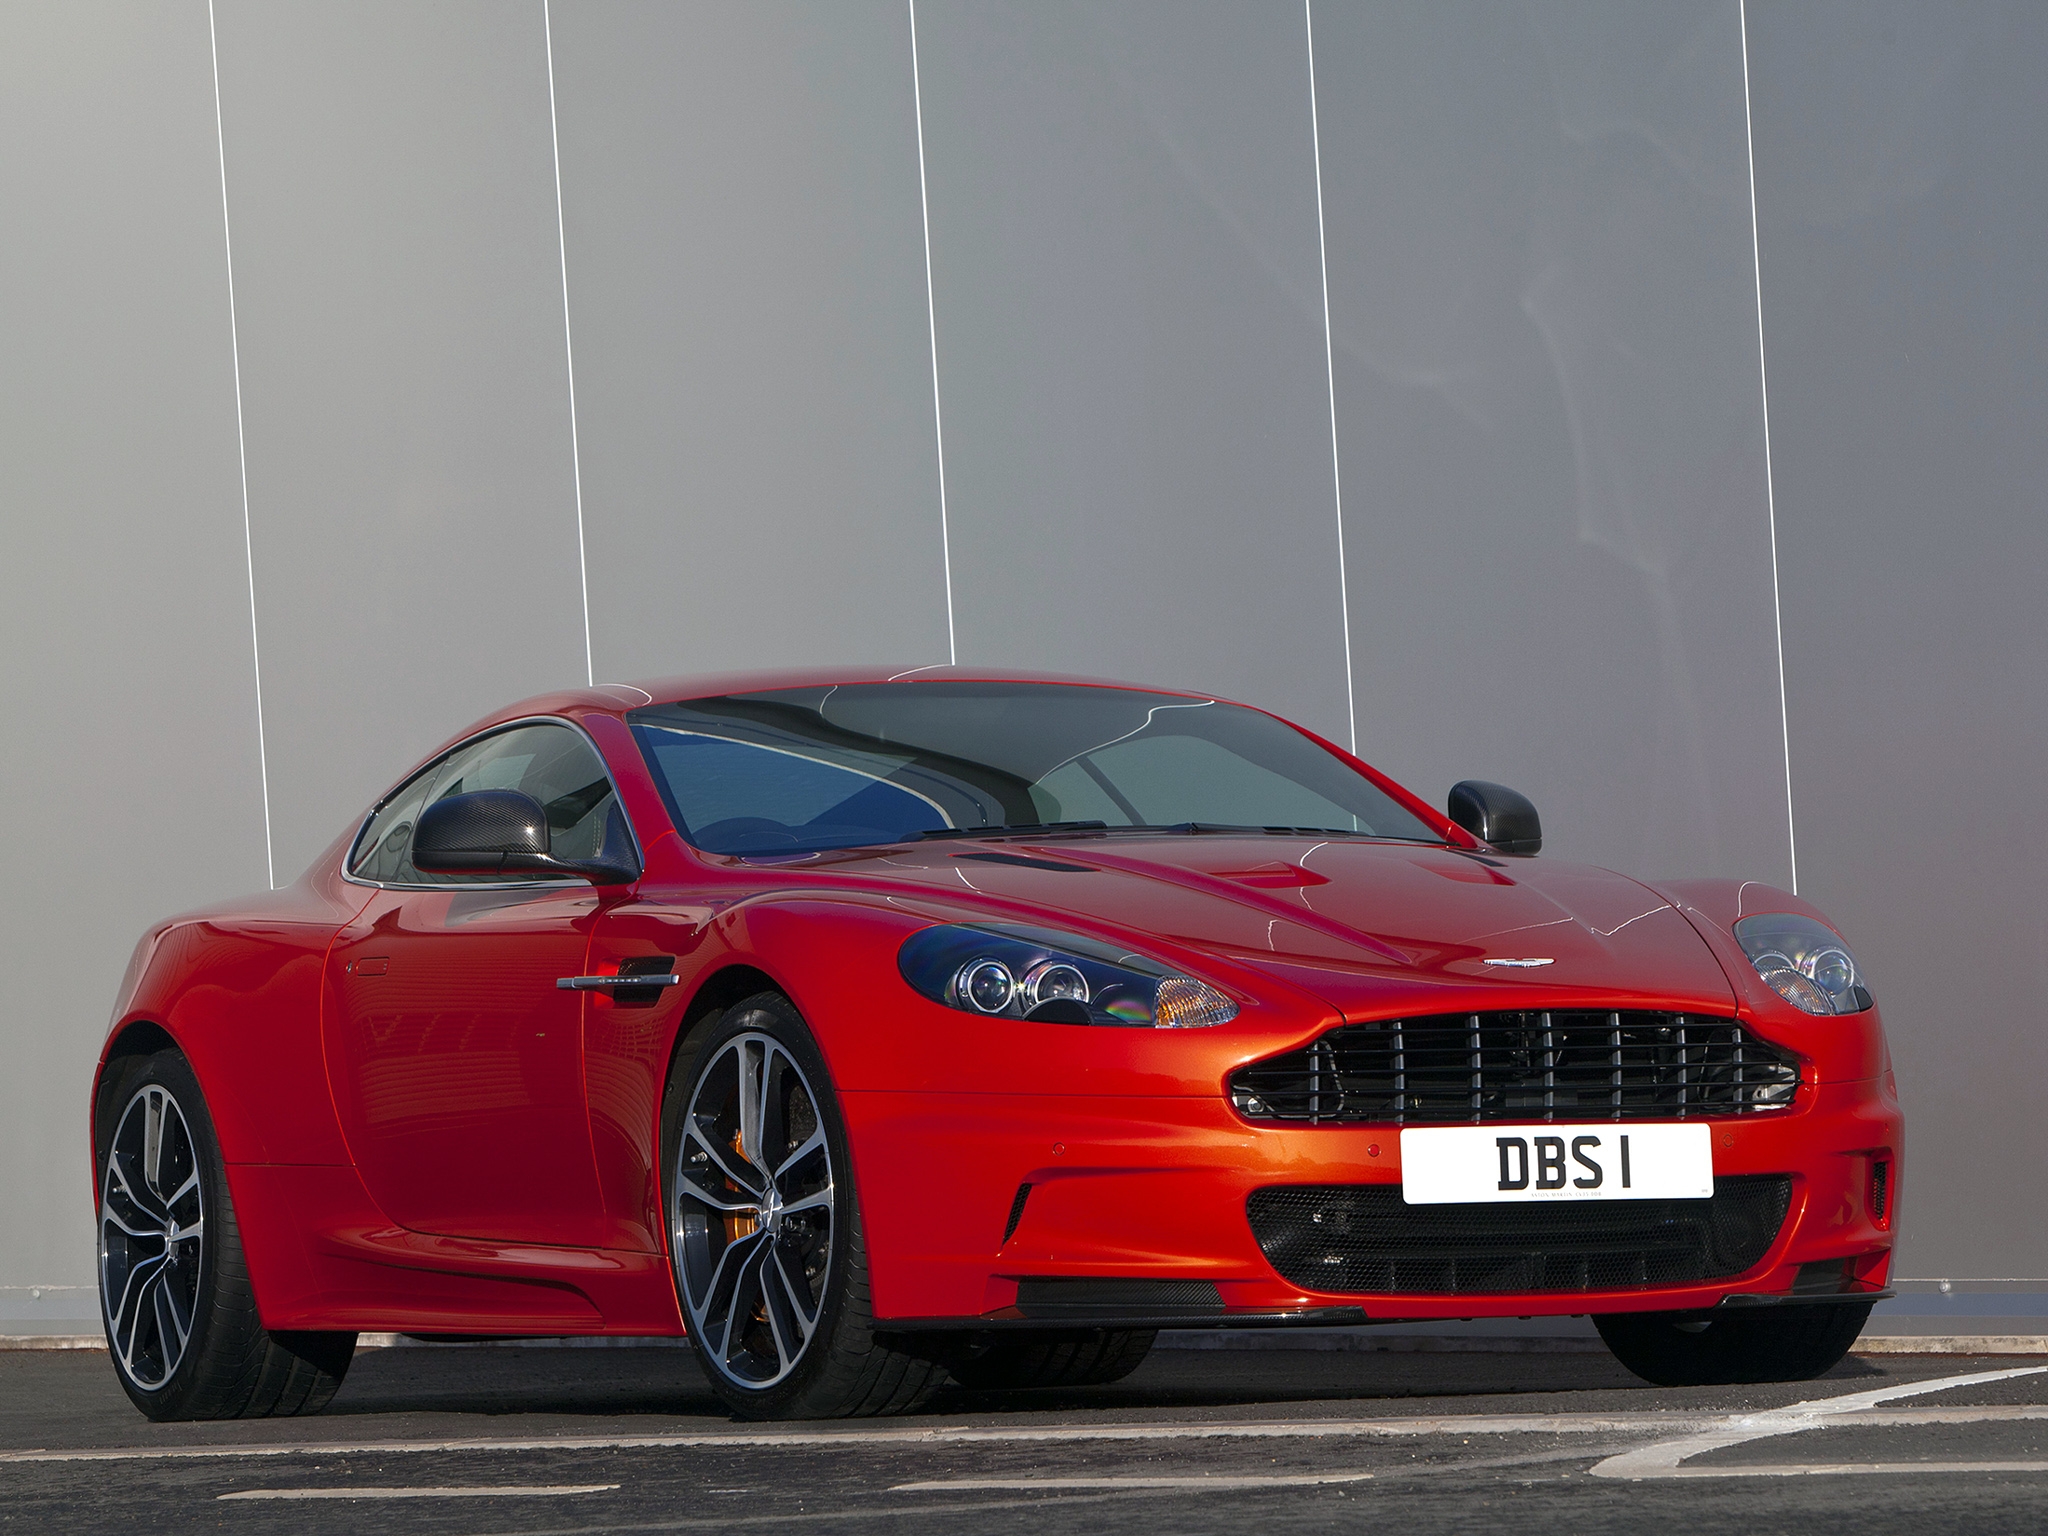 aston martin, sports, cars, red, front view, dbs, 2011 Aesthetic wallpaper